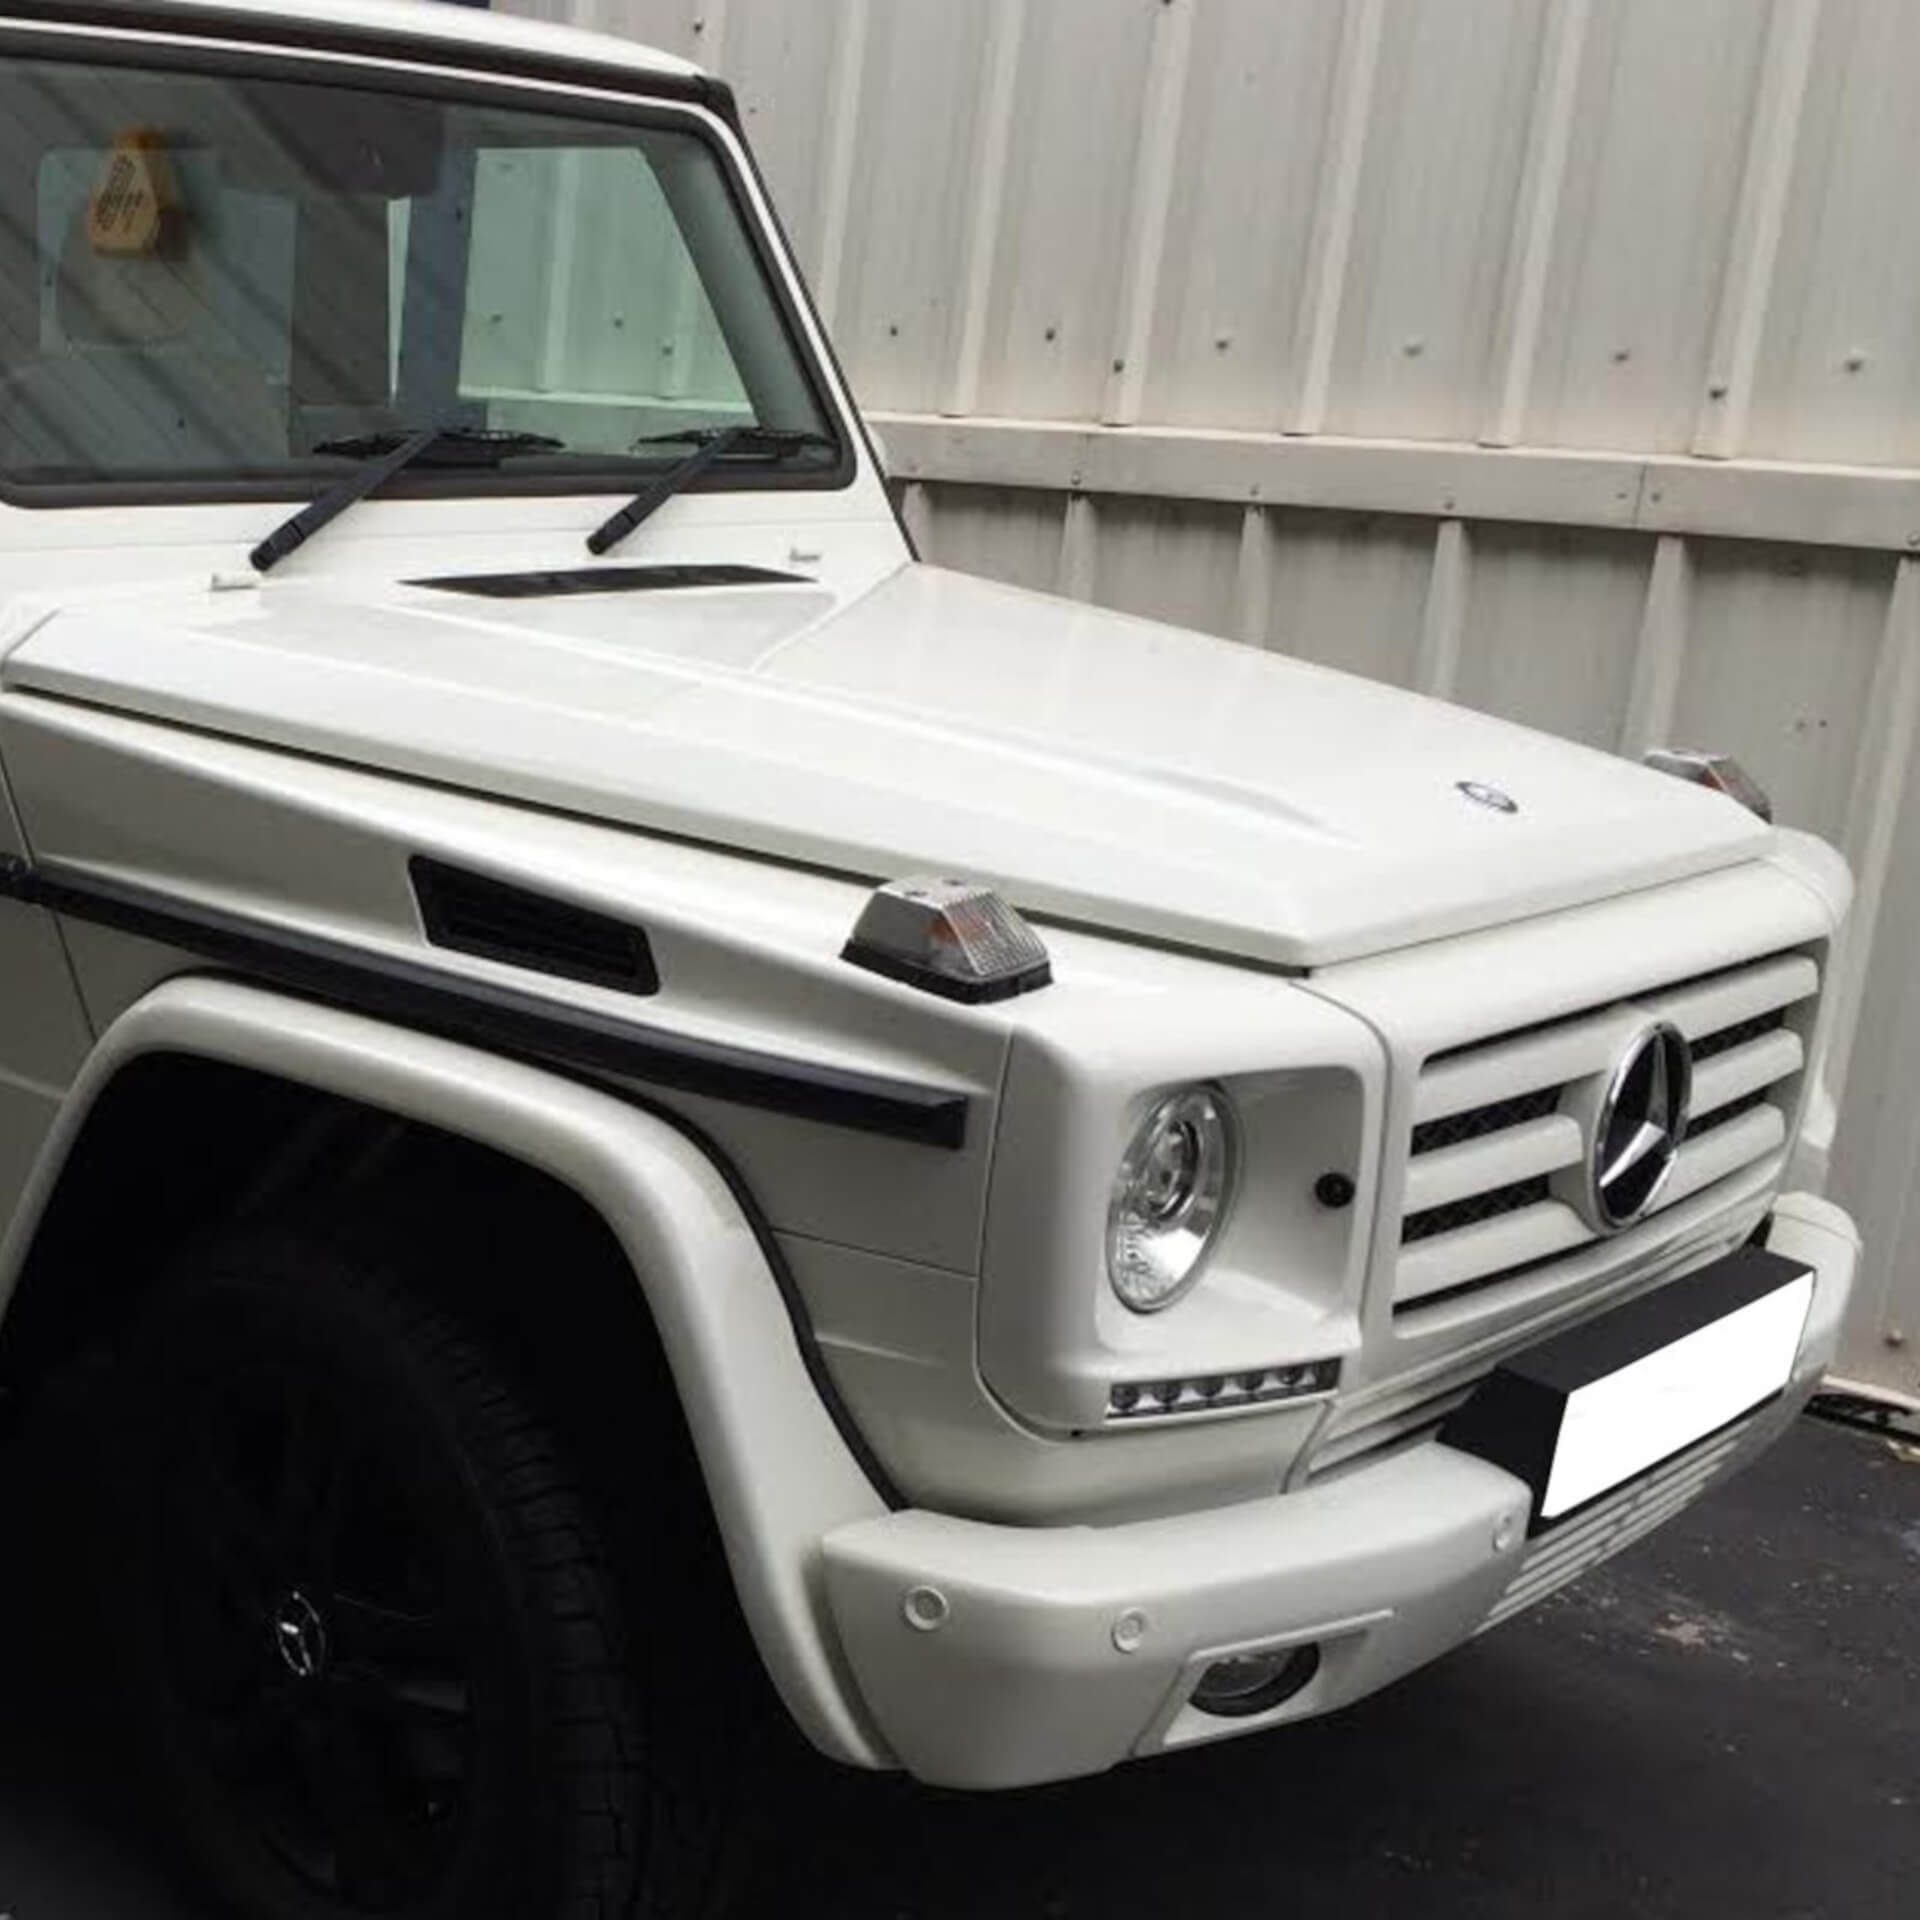 Direct4x4 accessories for Mercedes G-Class/G-Wagen vehicles with a photo of the front of a white Mercedes G-Wagen at our Derby depot